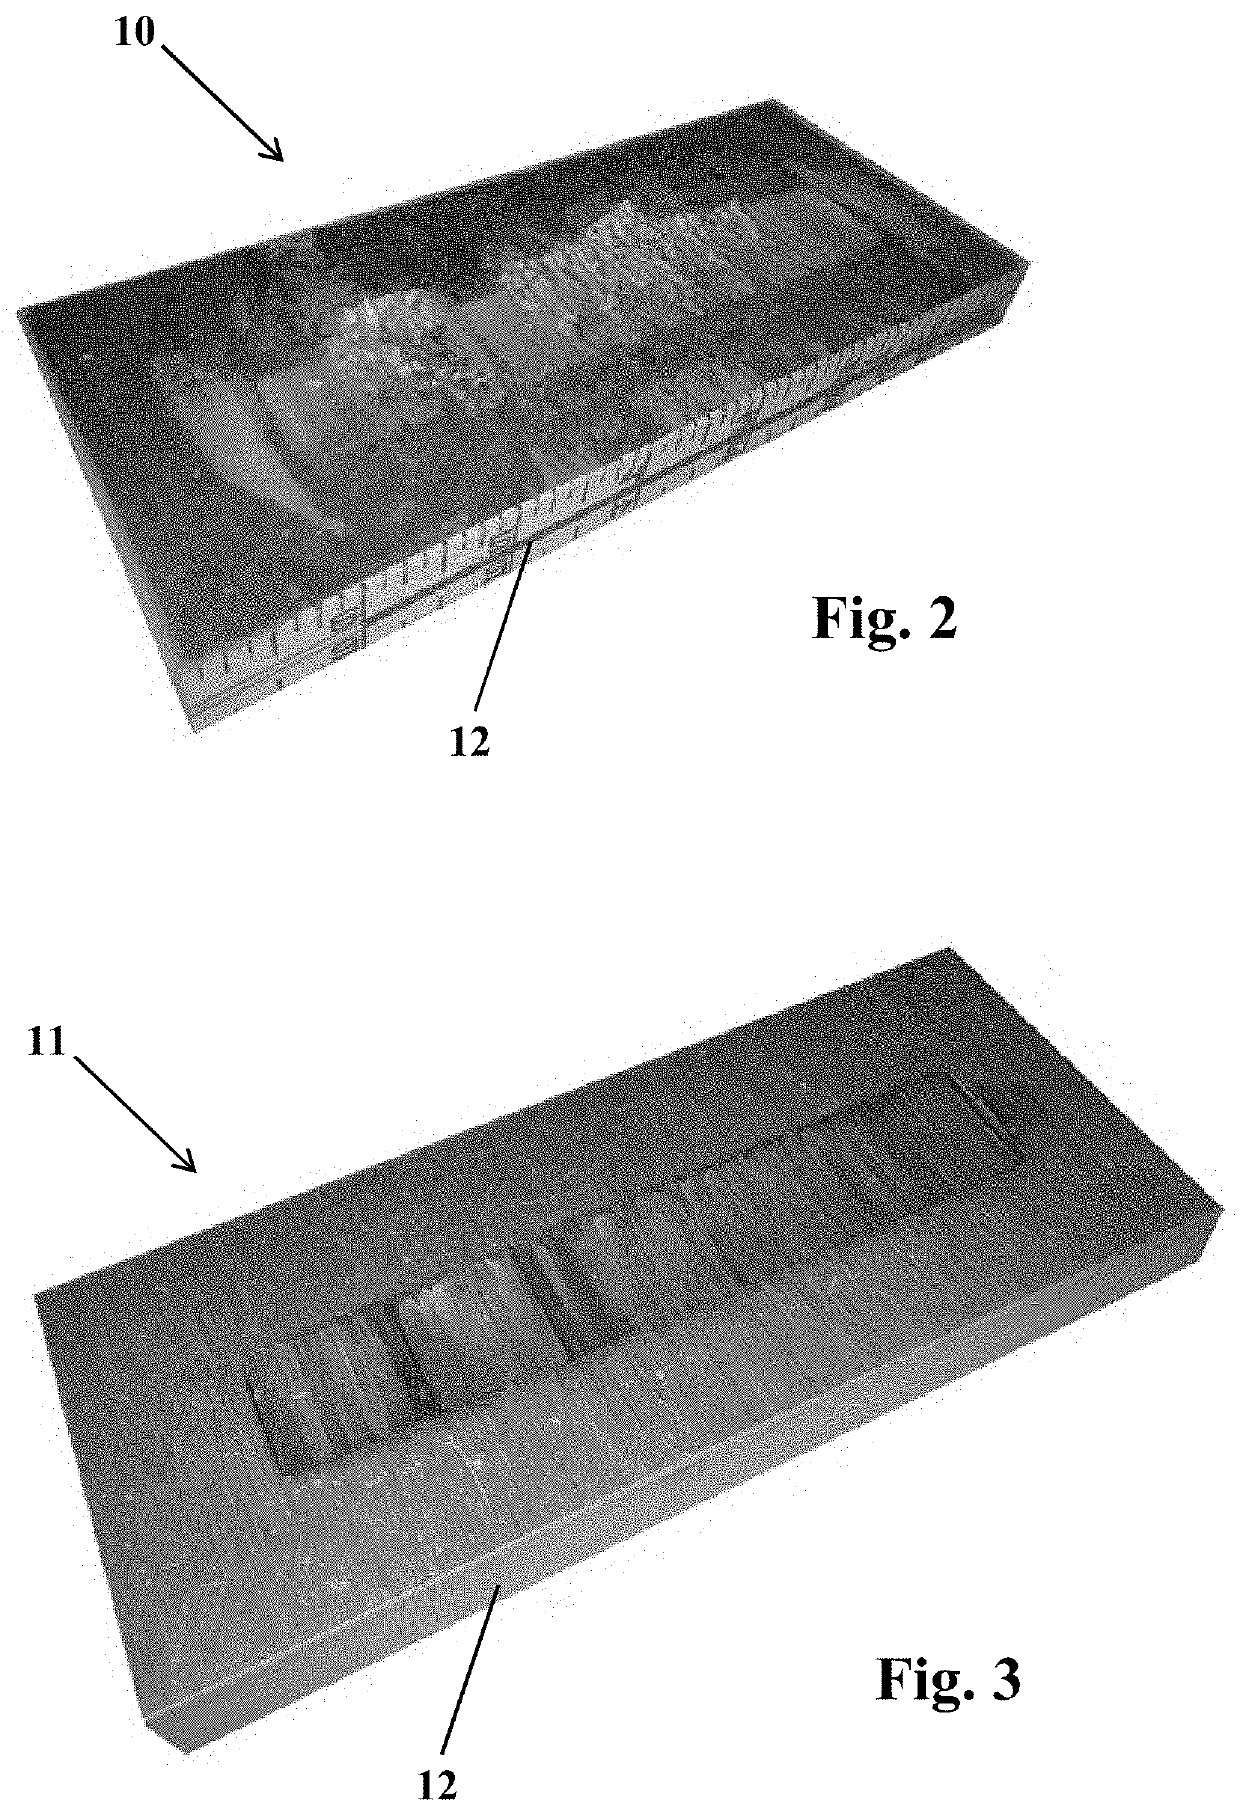 Method for producing a scaled-up solid model of microscopic features of a surface